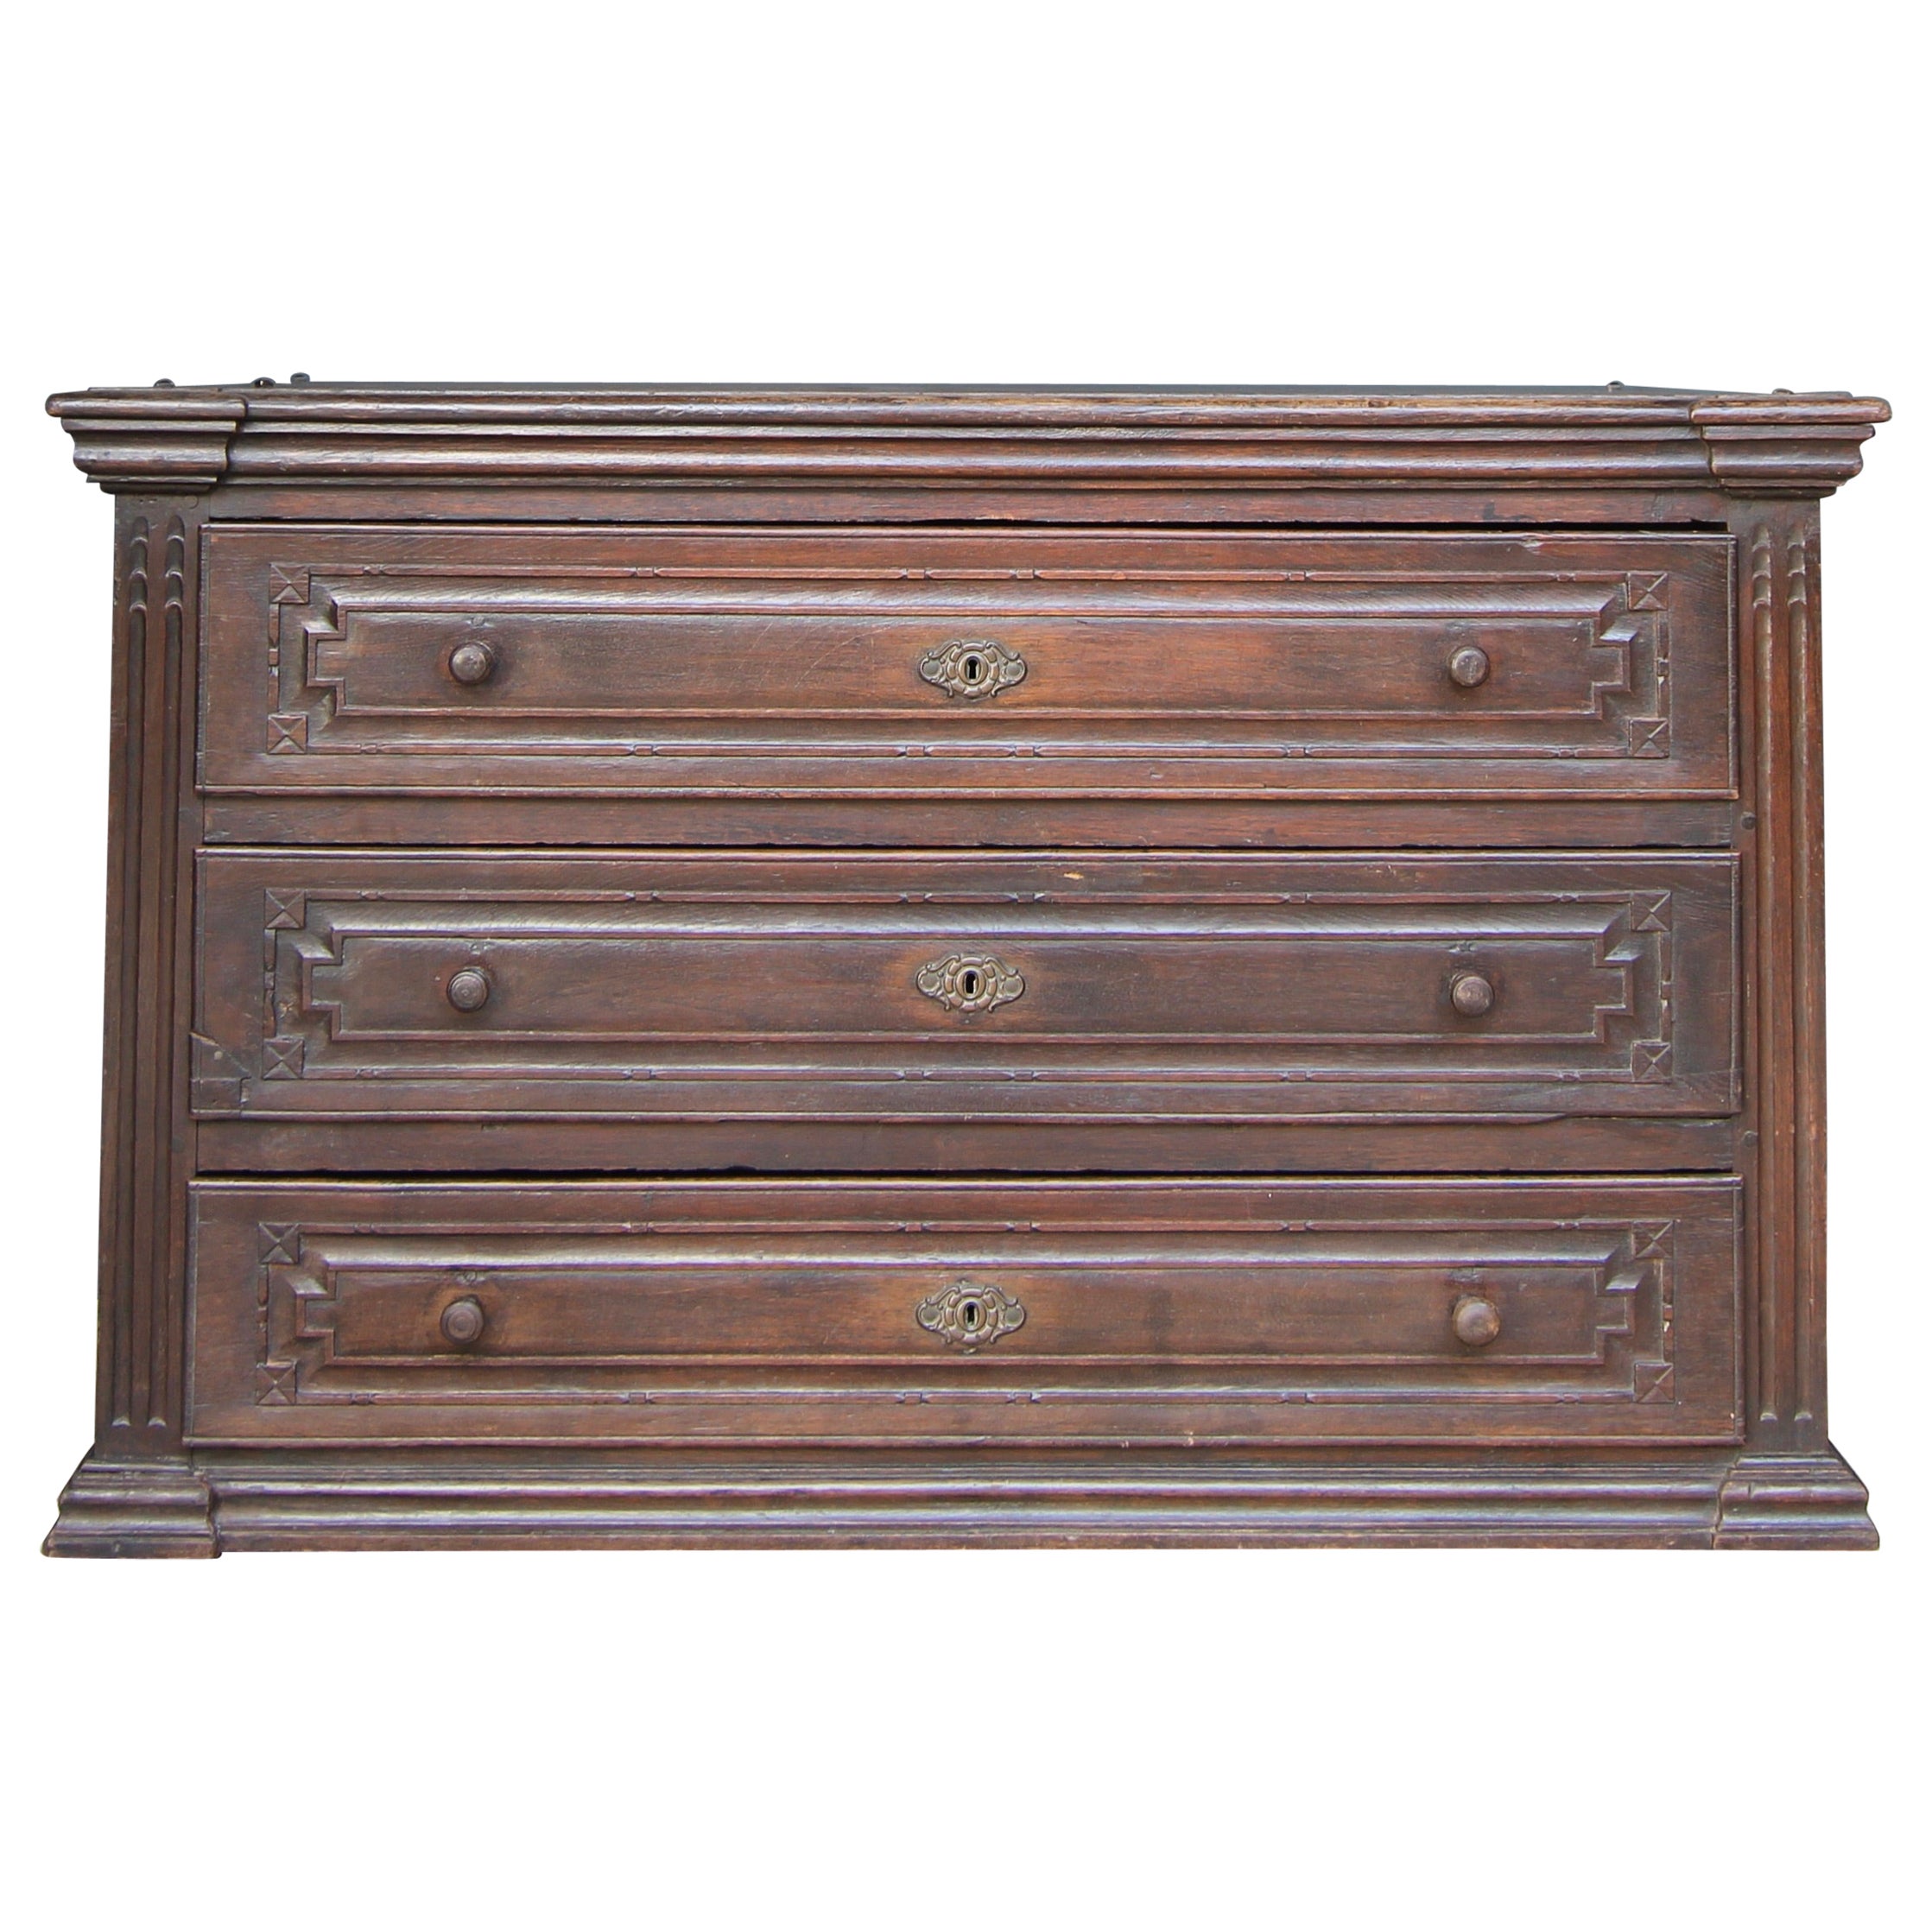 Late 18th Century Provincial Chest of Drawers Made of Oak